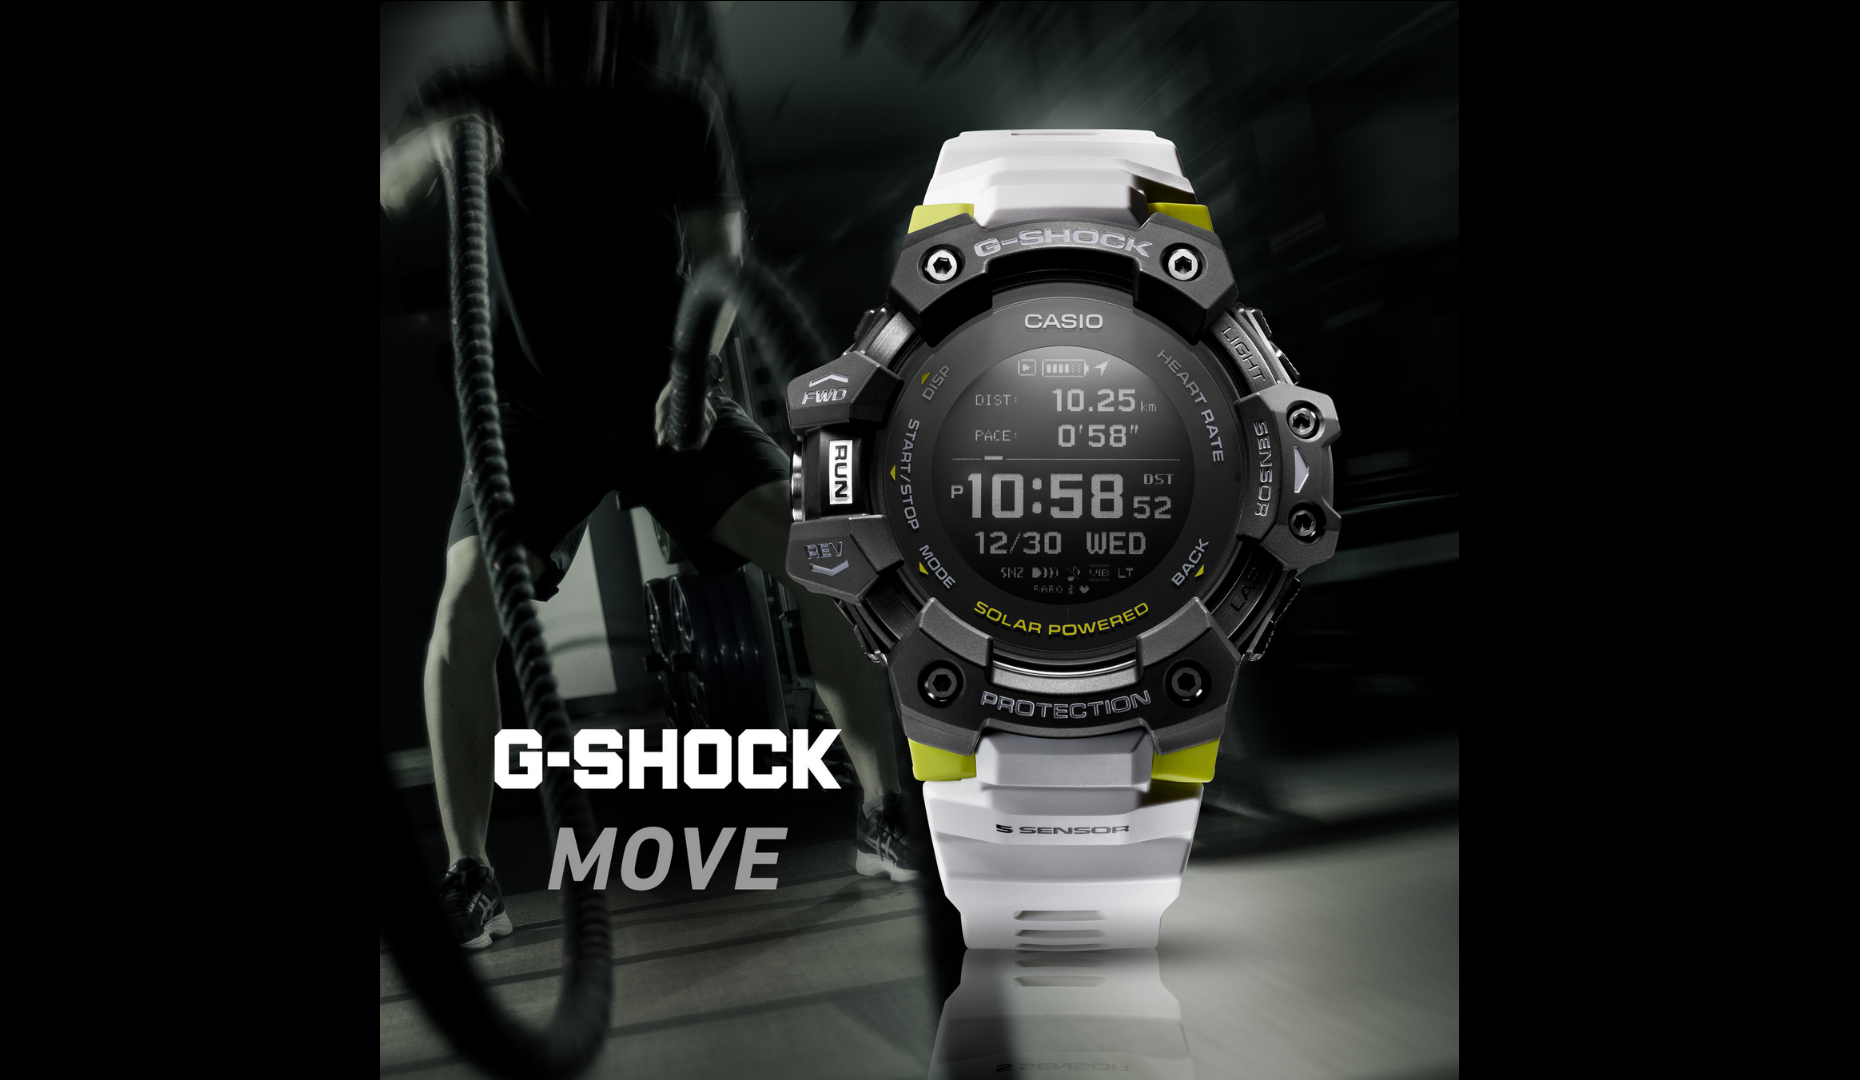 The latest Casio GSHOCK watch is the first of its line to have a heart